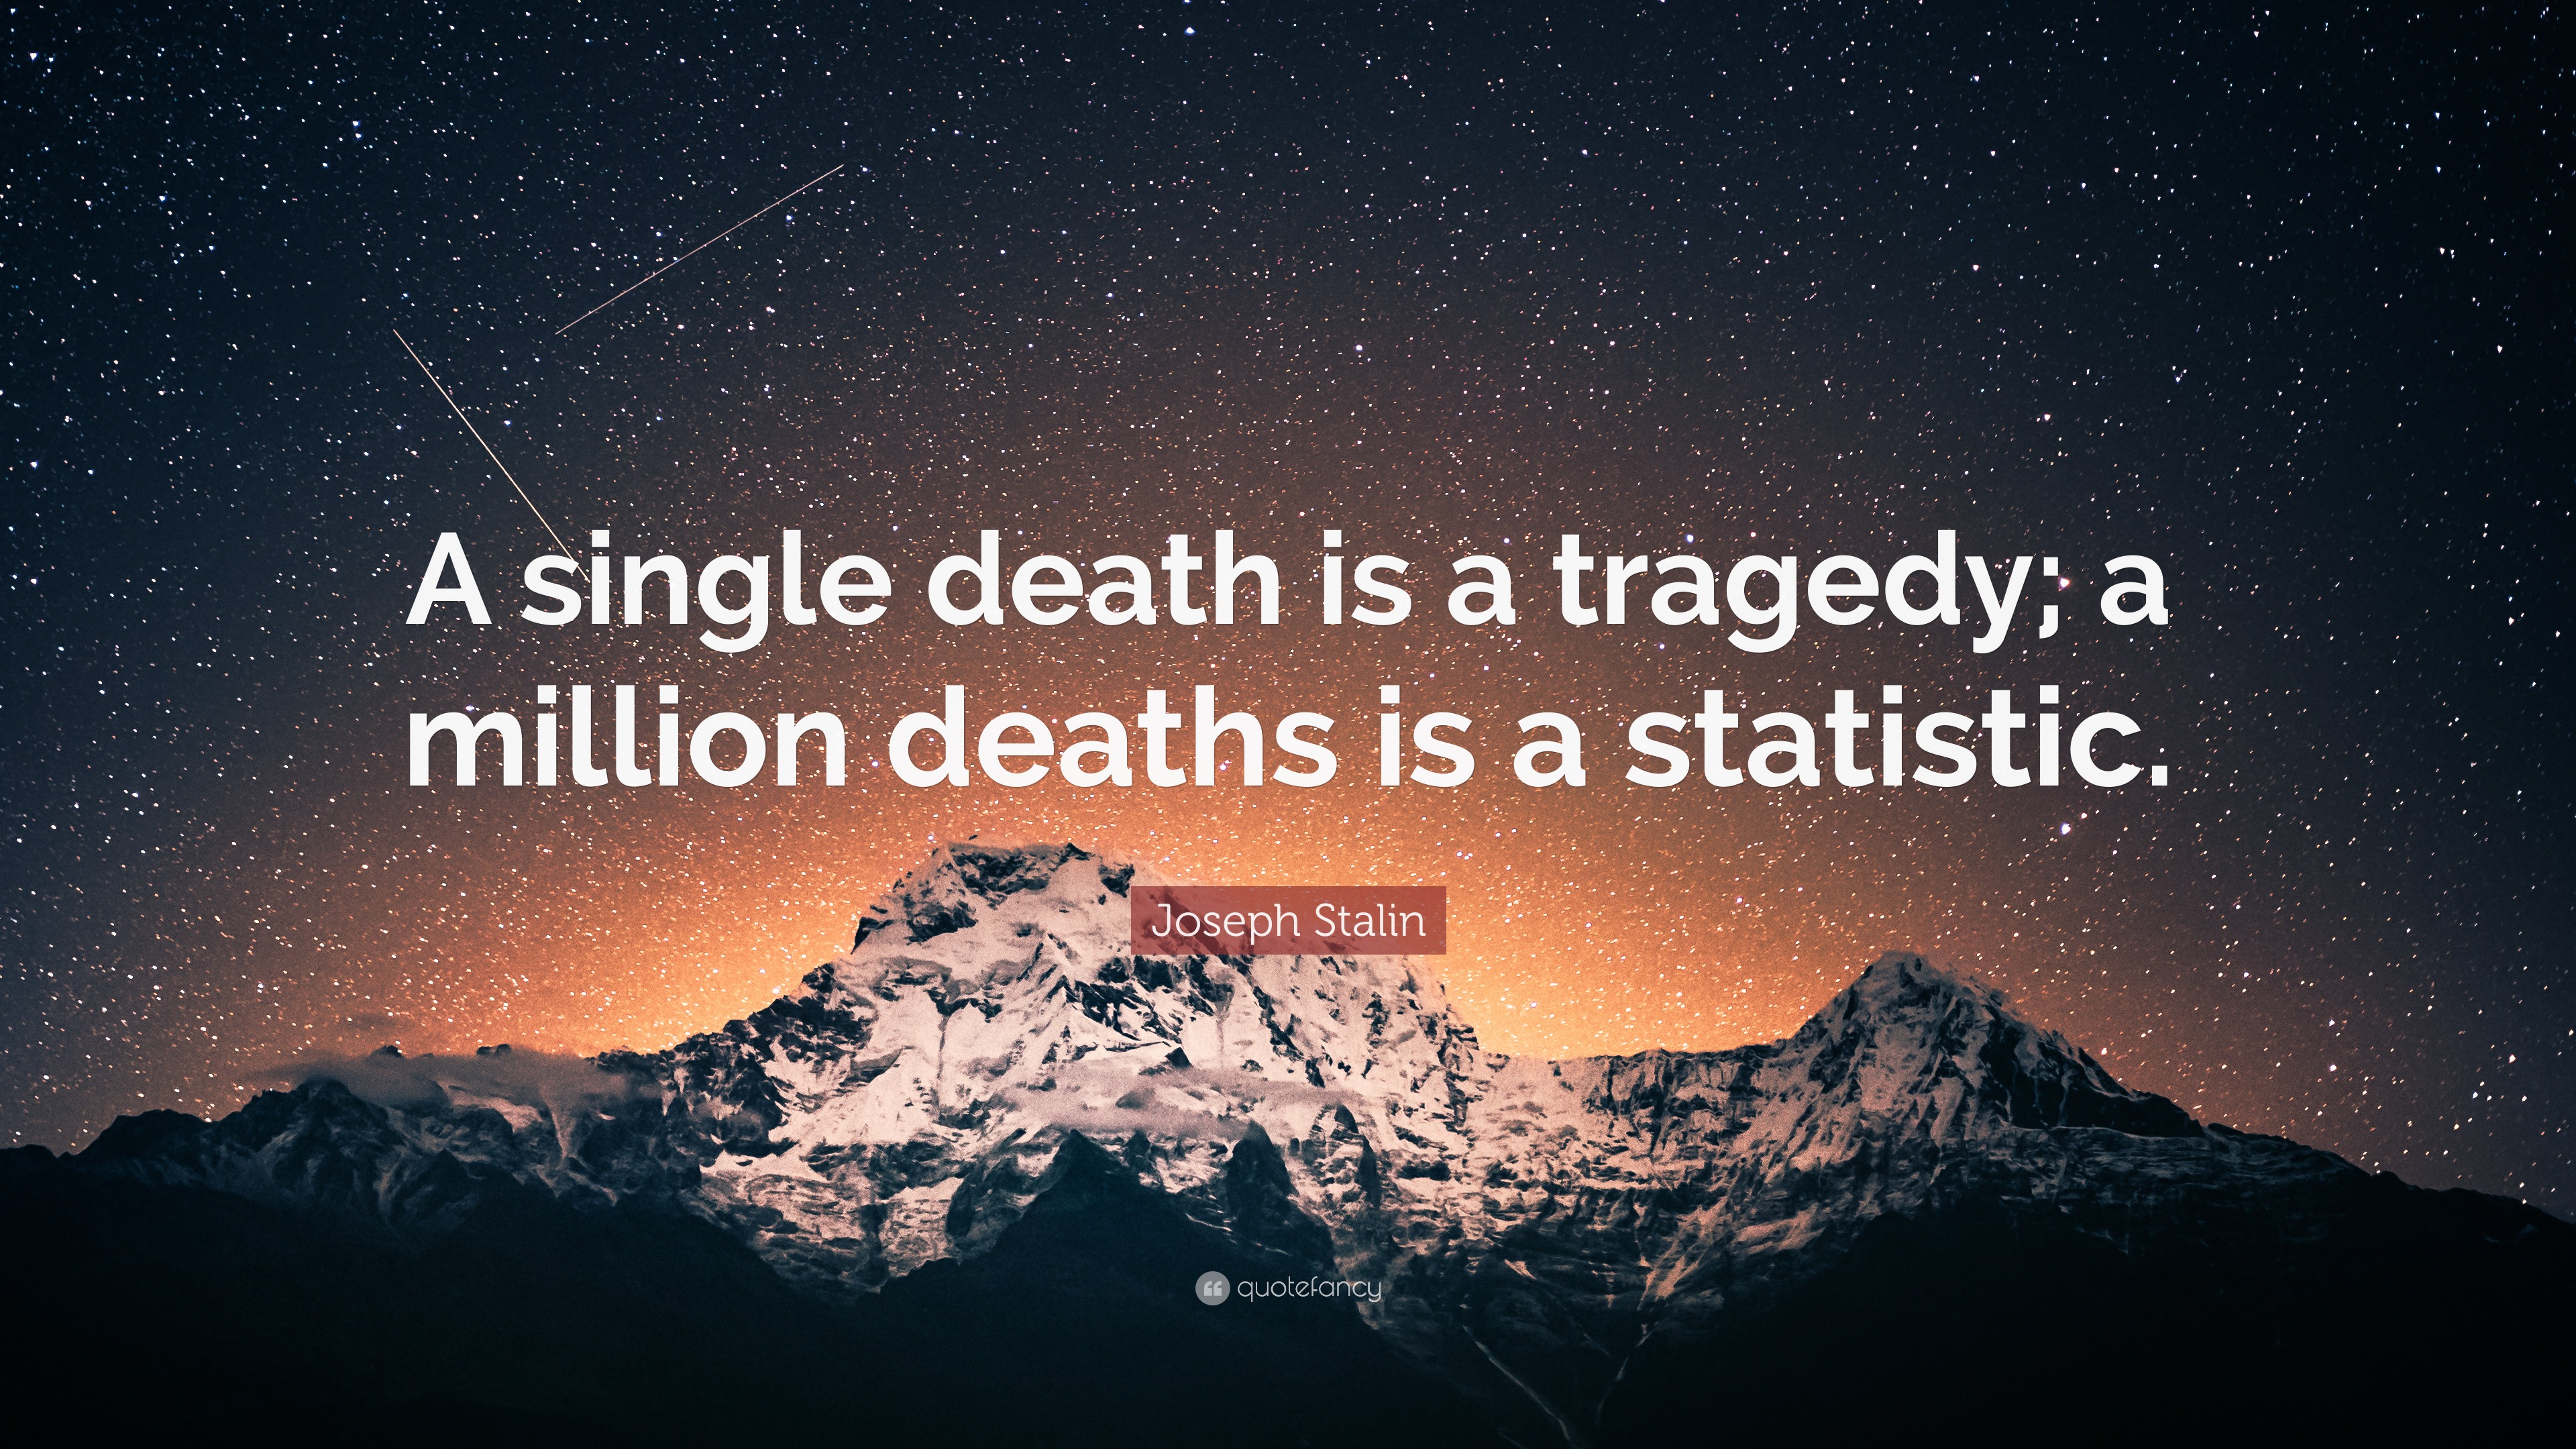 Joseph Stalin Quote: “A single death is a tragedy; a million deaths is